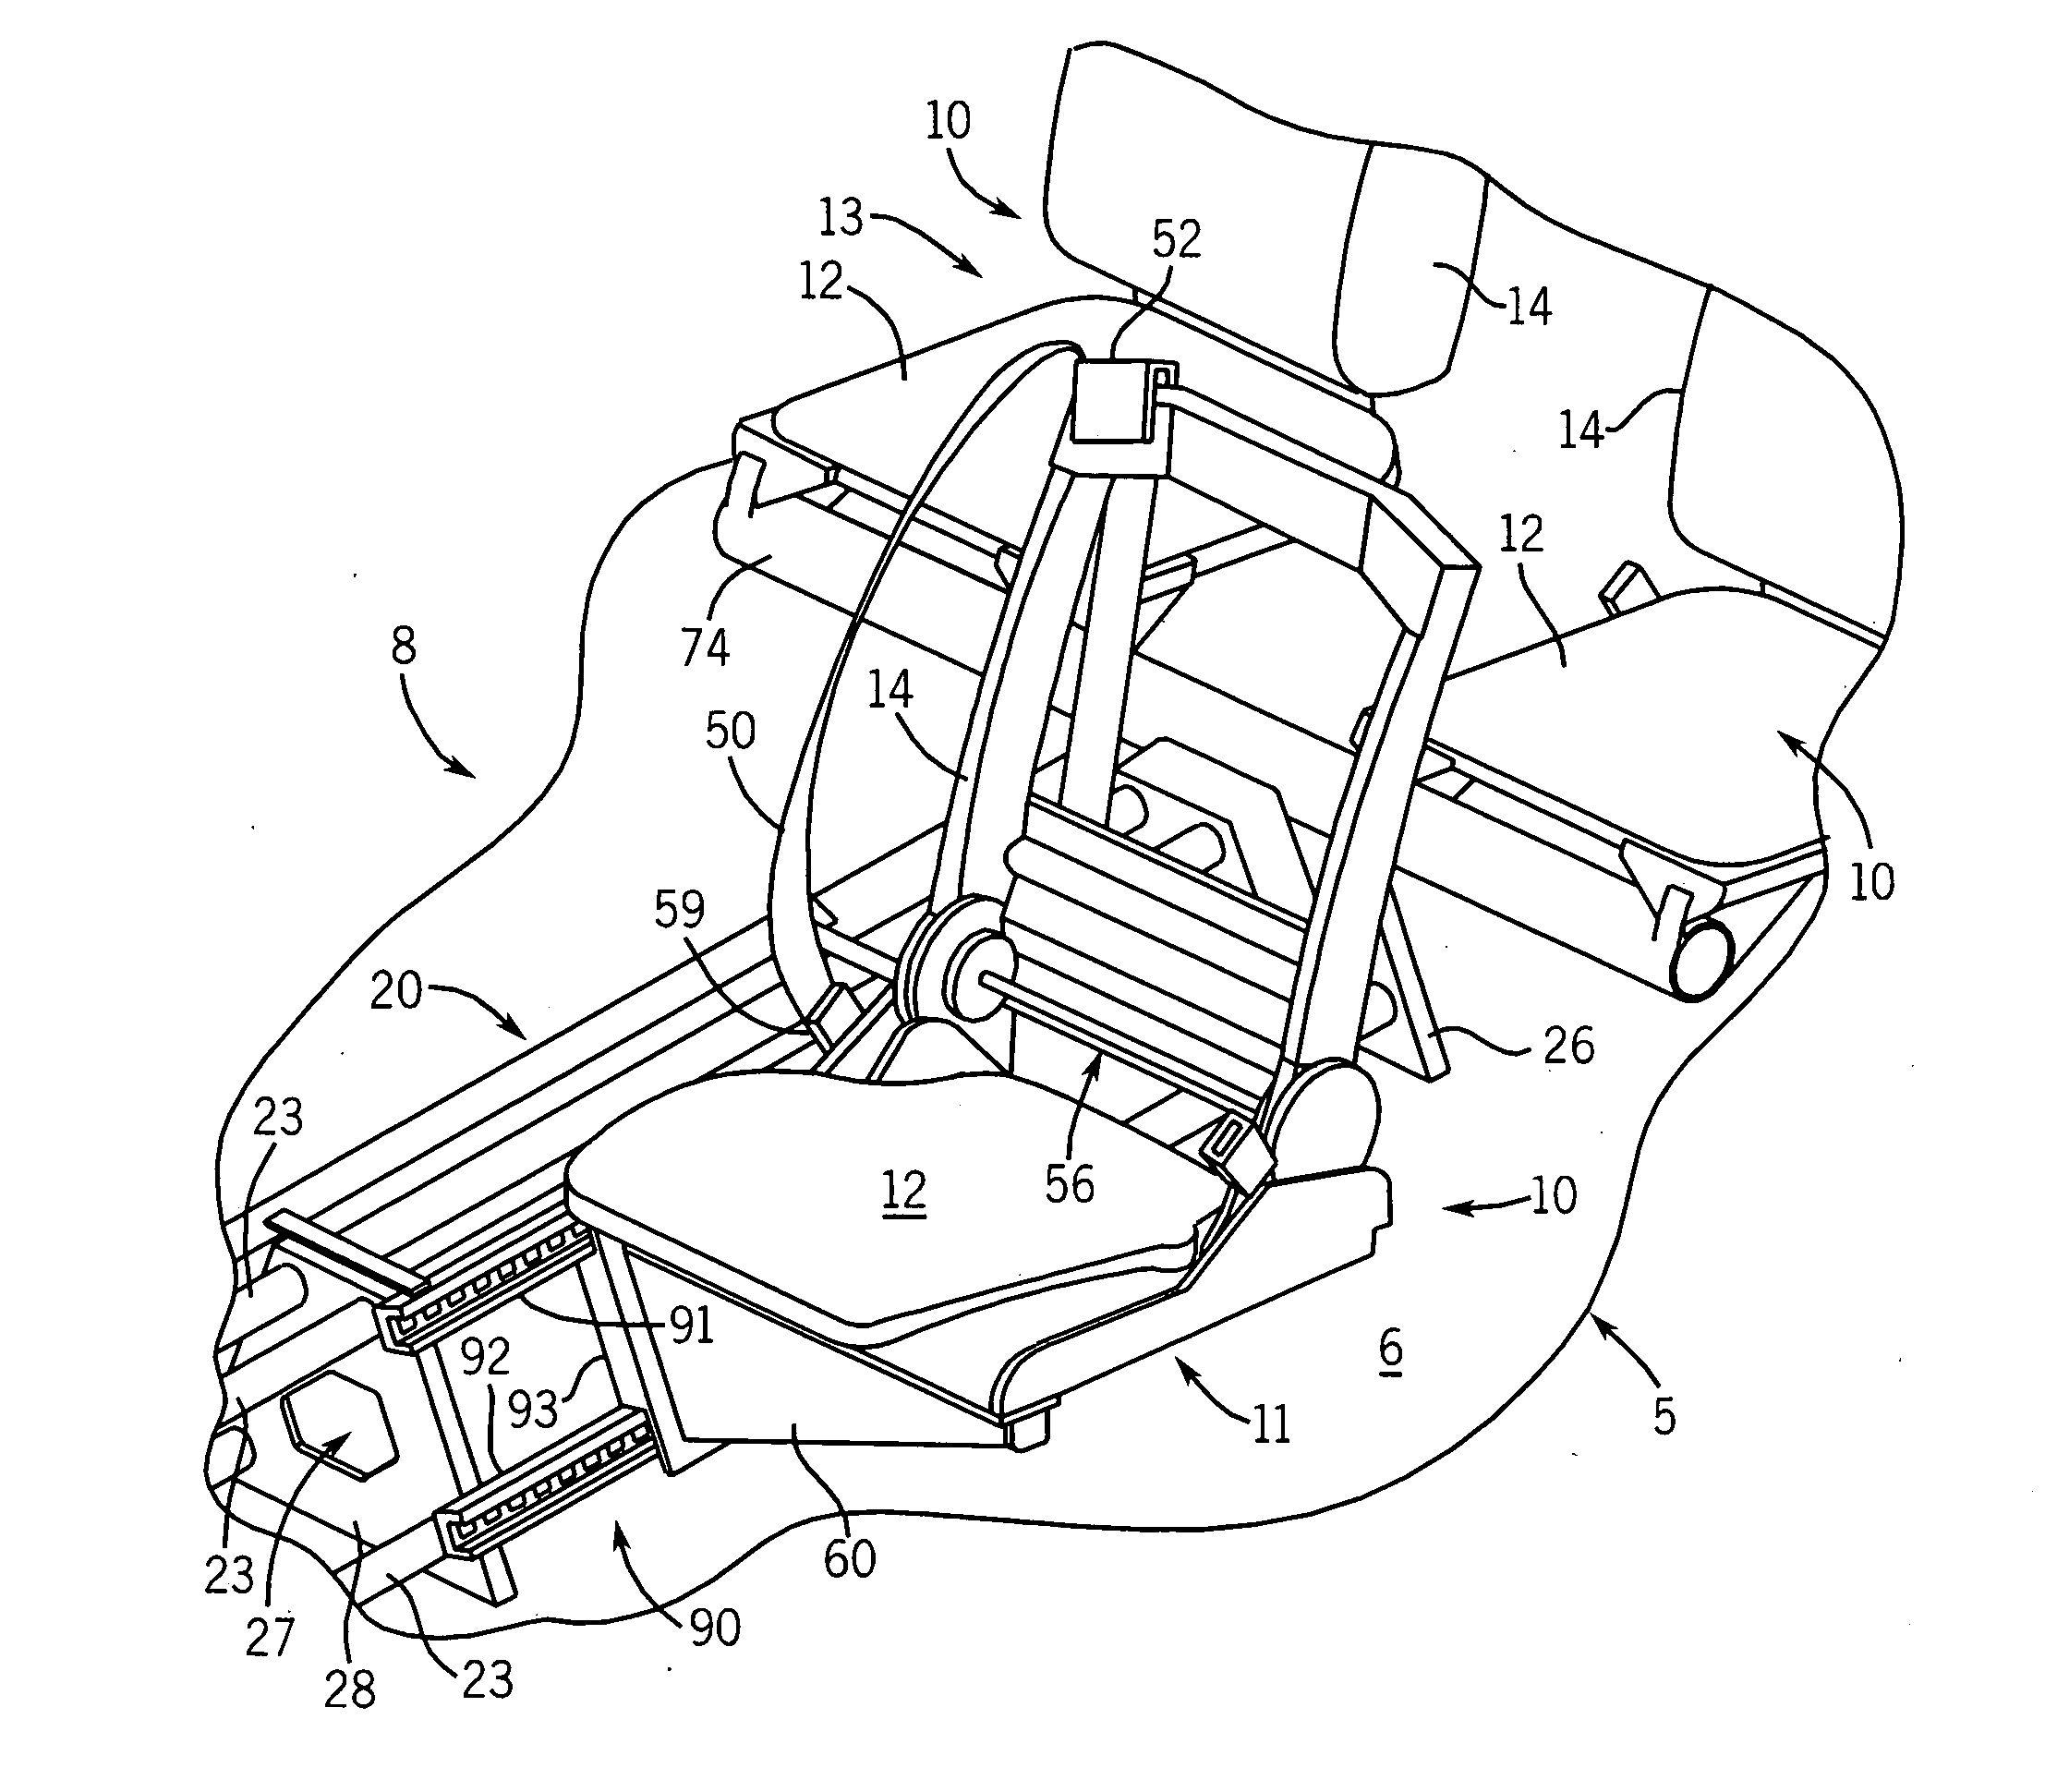 Cantilever supported vehicle seat and system